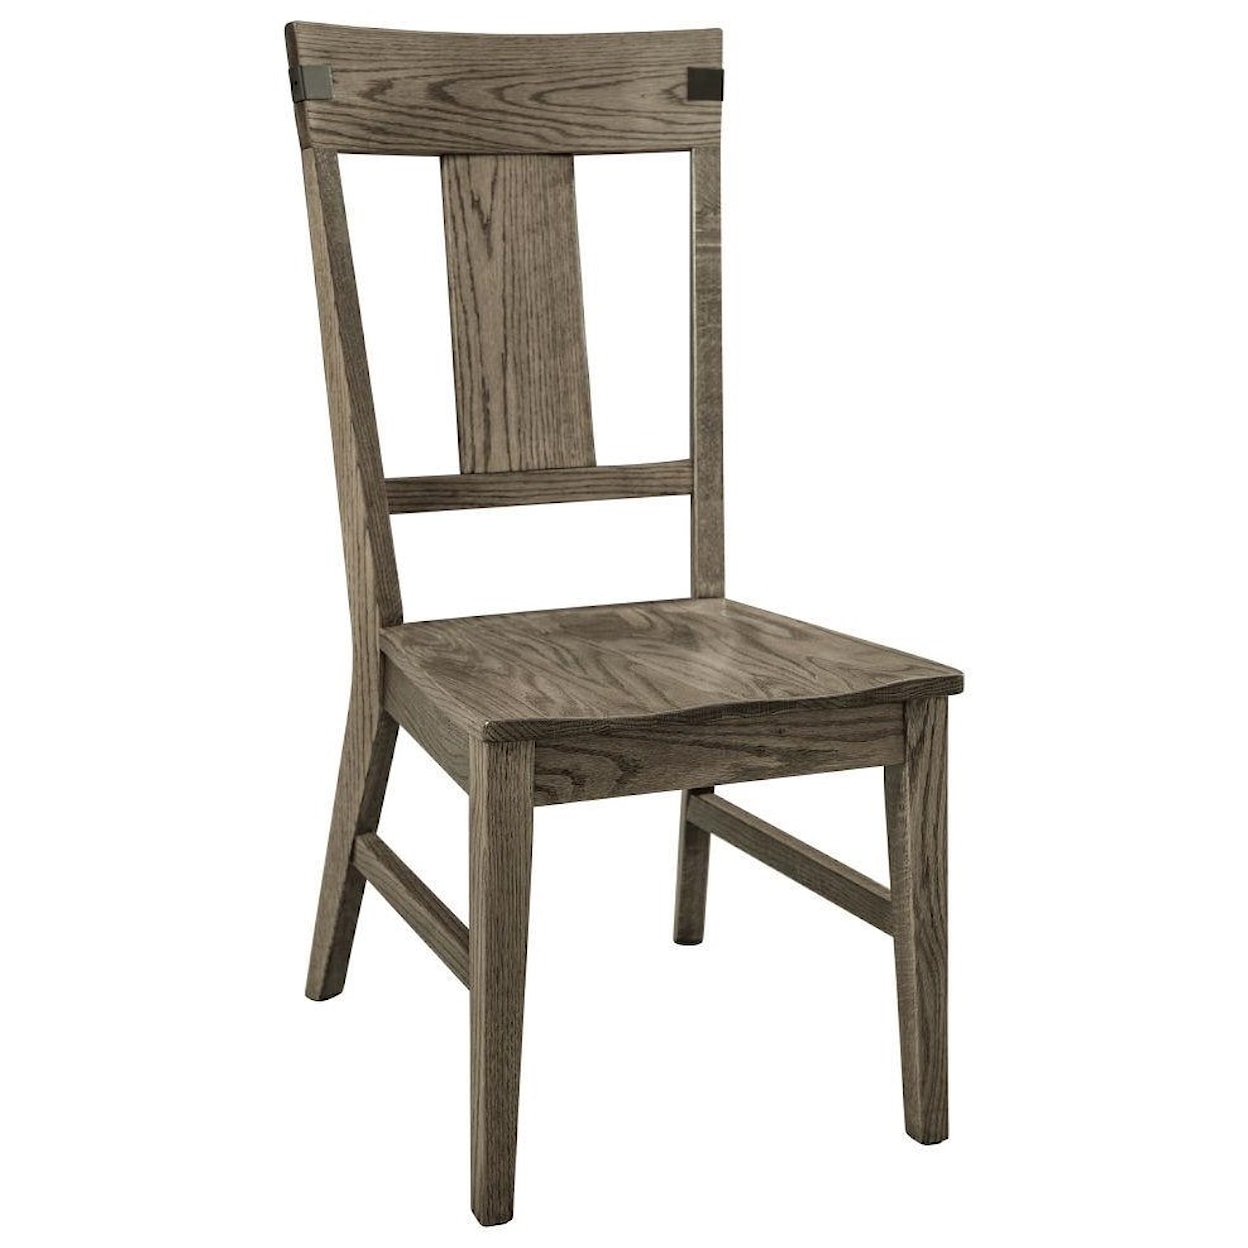 F&N Woodworking Lahoma Side Chair